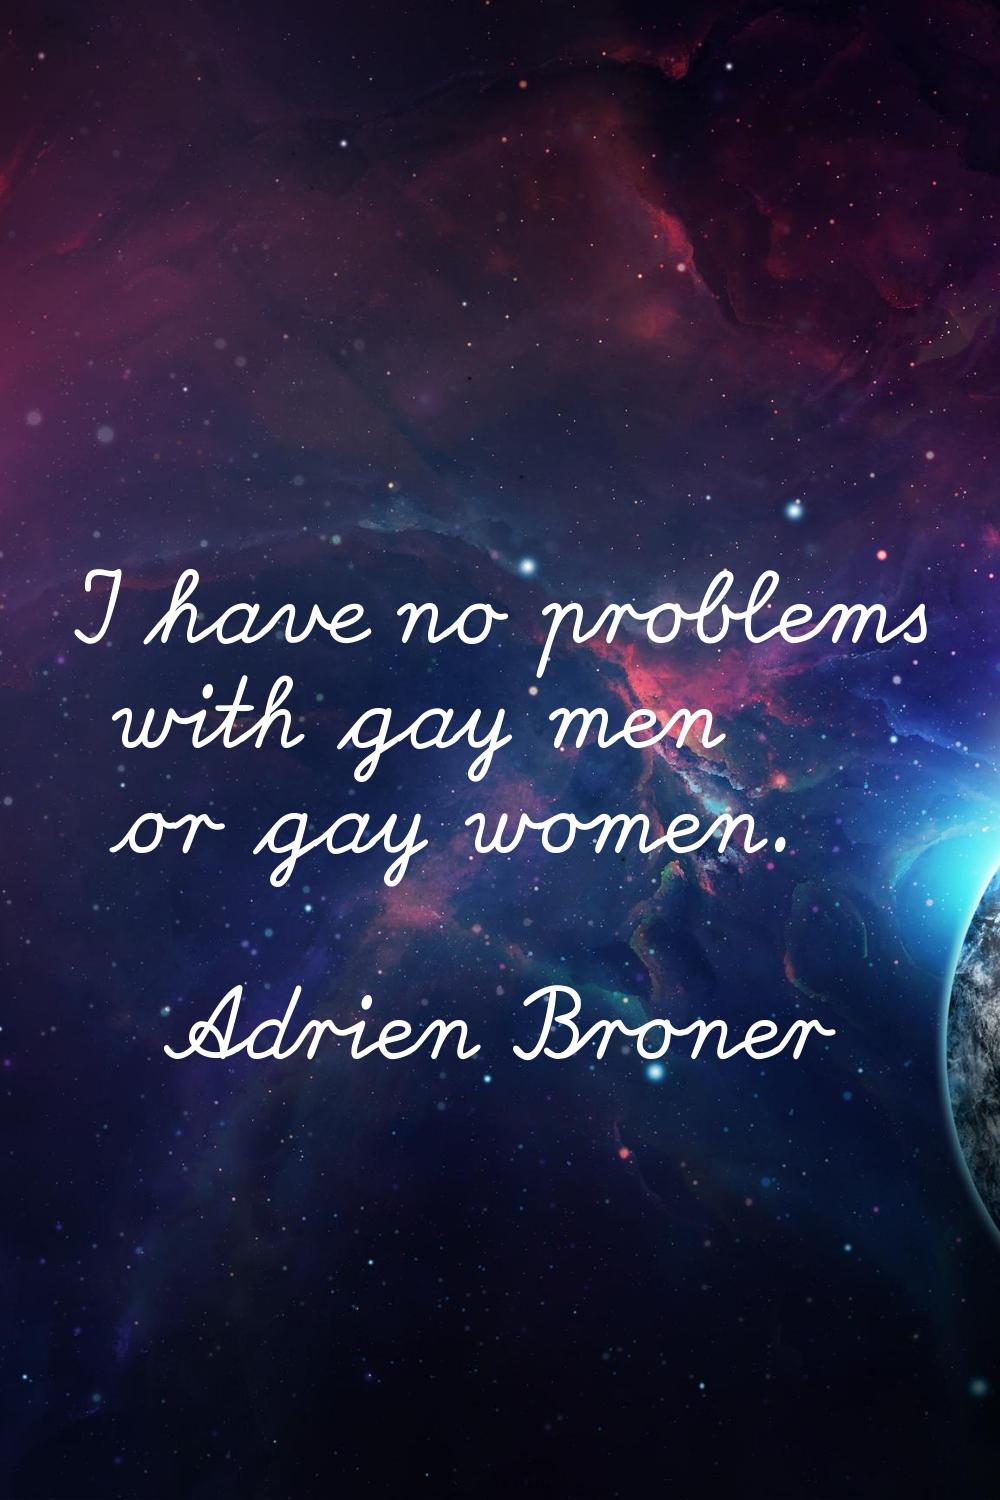 I have no problems with gay men or gay women.